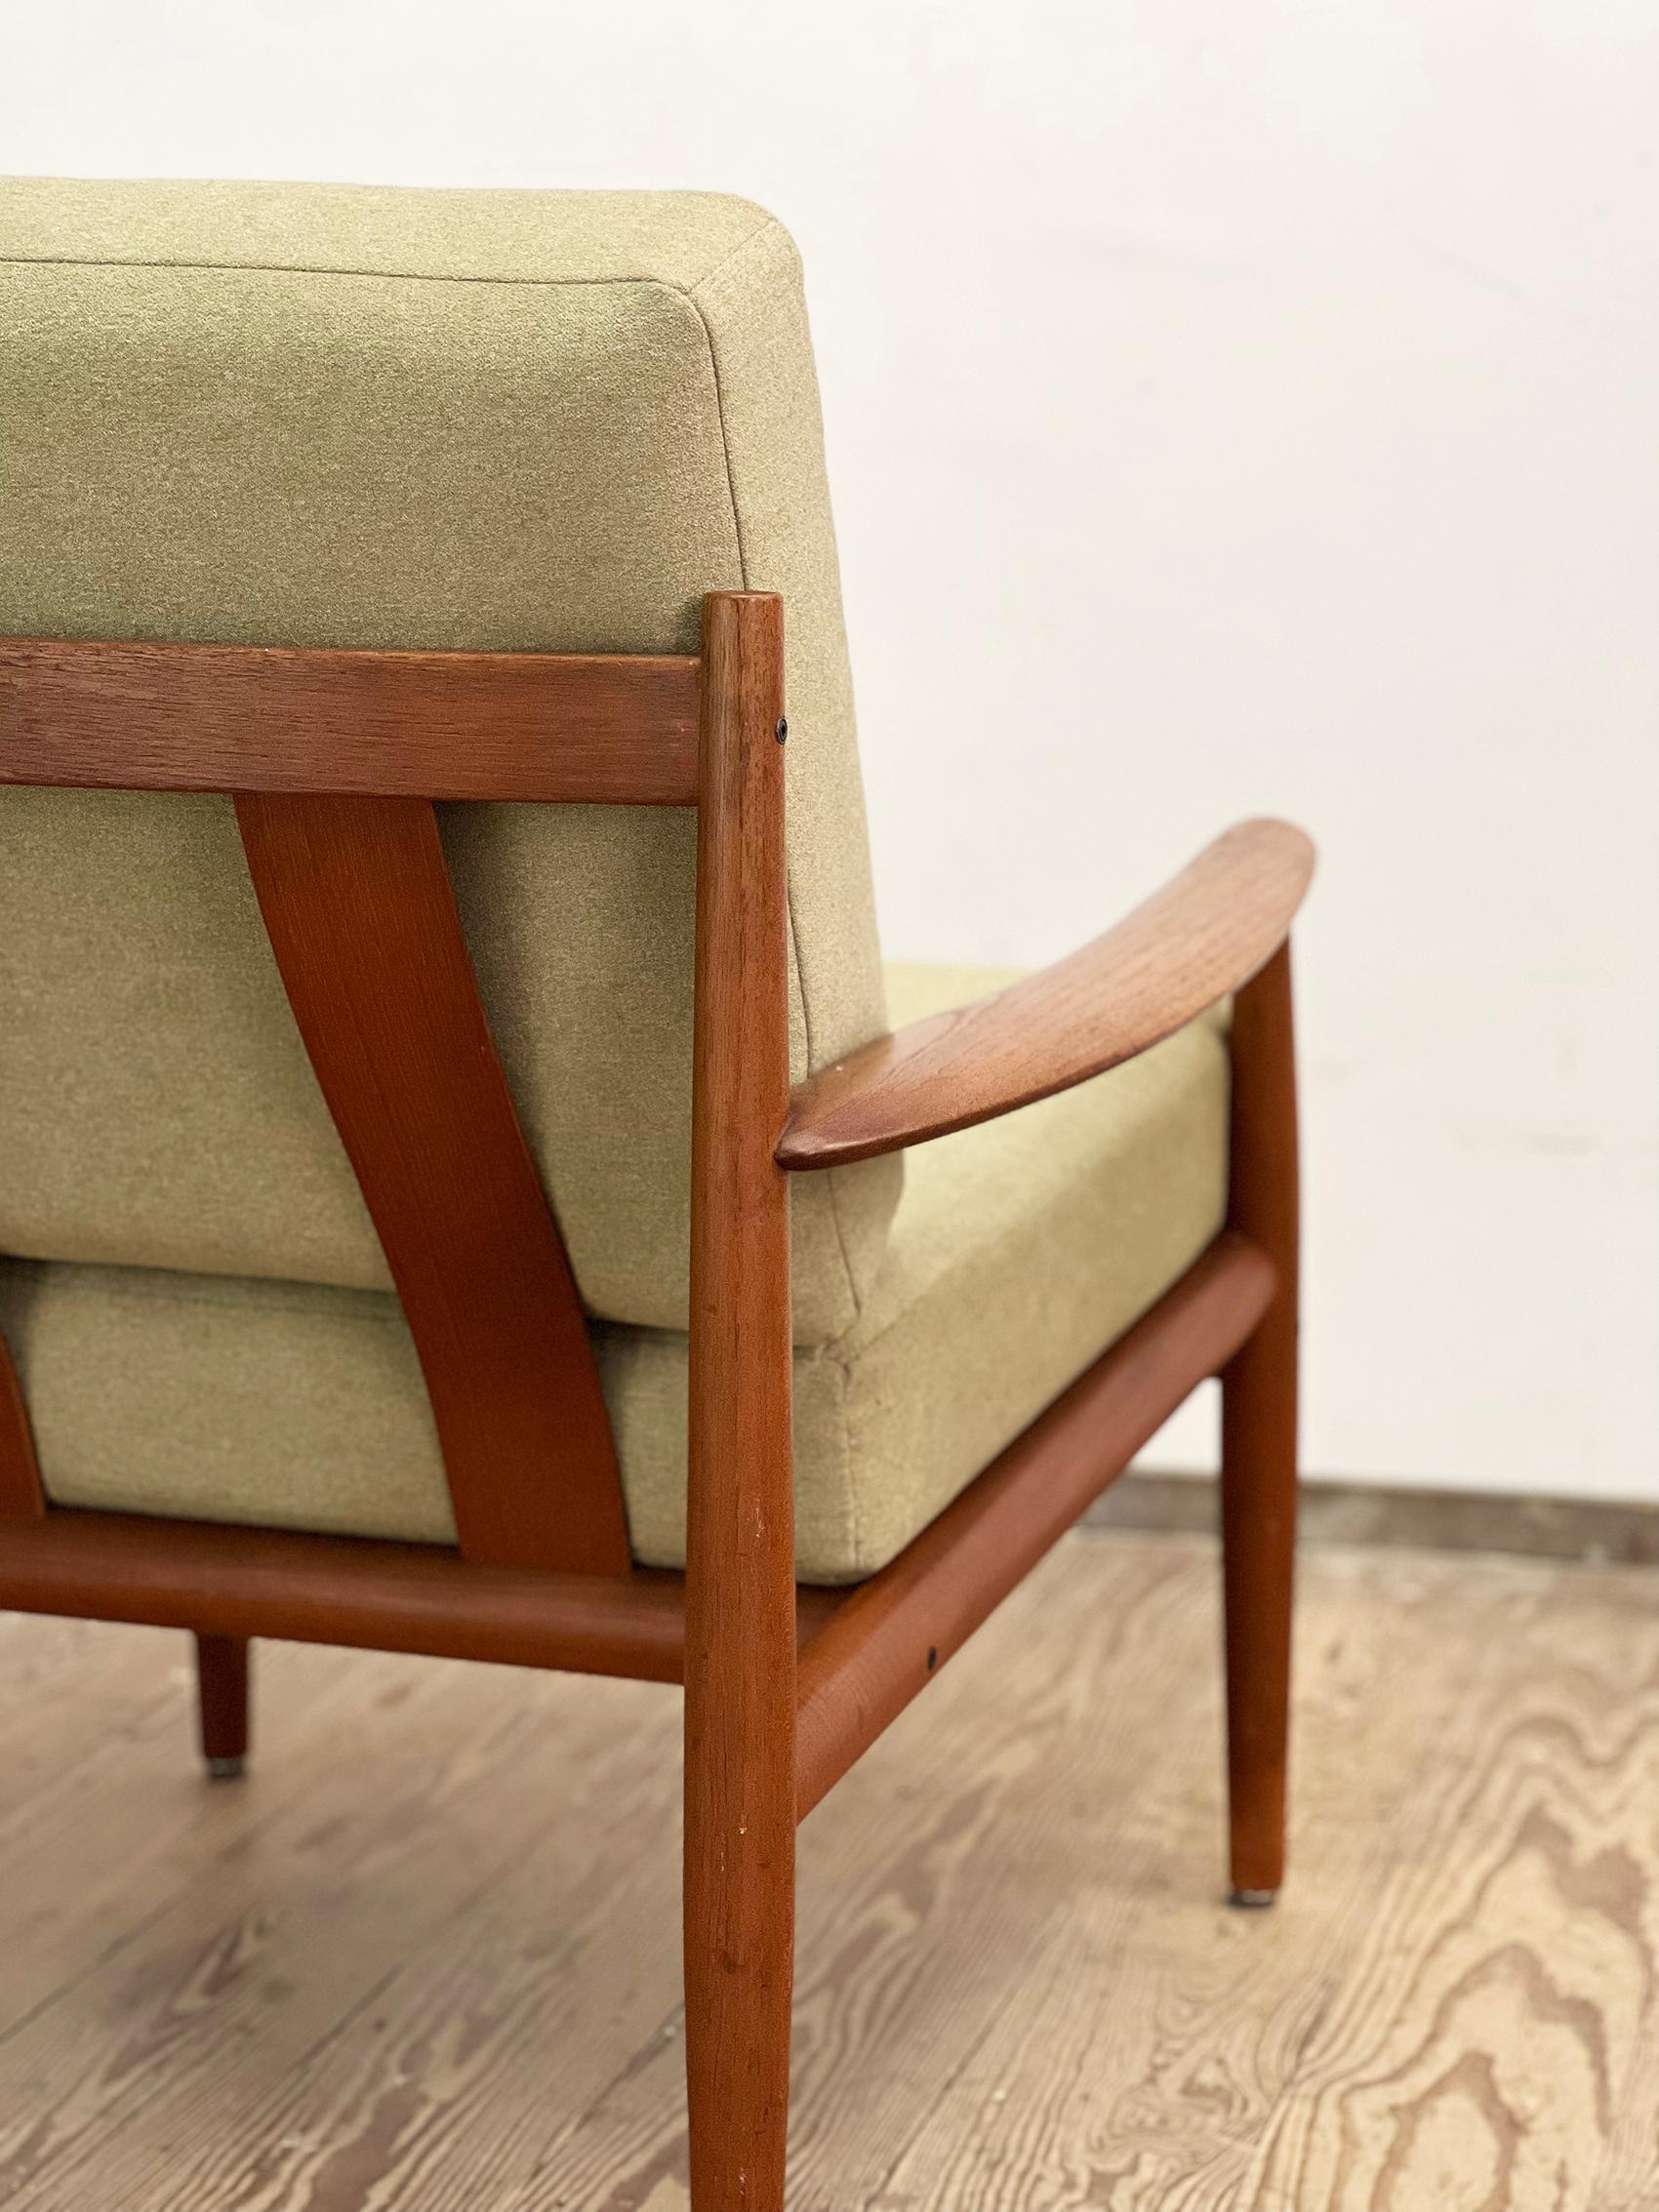 Mid-20th Century Danish Mid-Century Armchair, Teak Easy Chair by Grete Jalk, France & Søn, 1950s For Sale